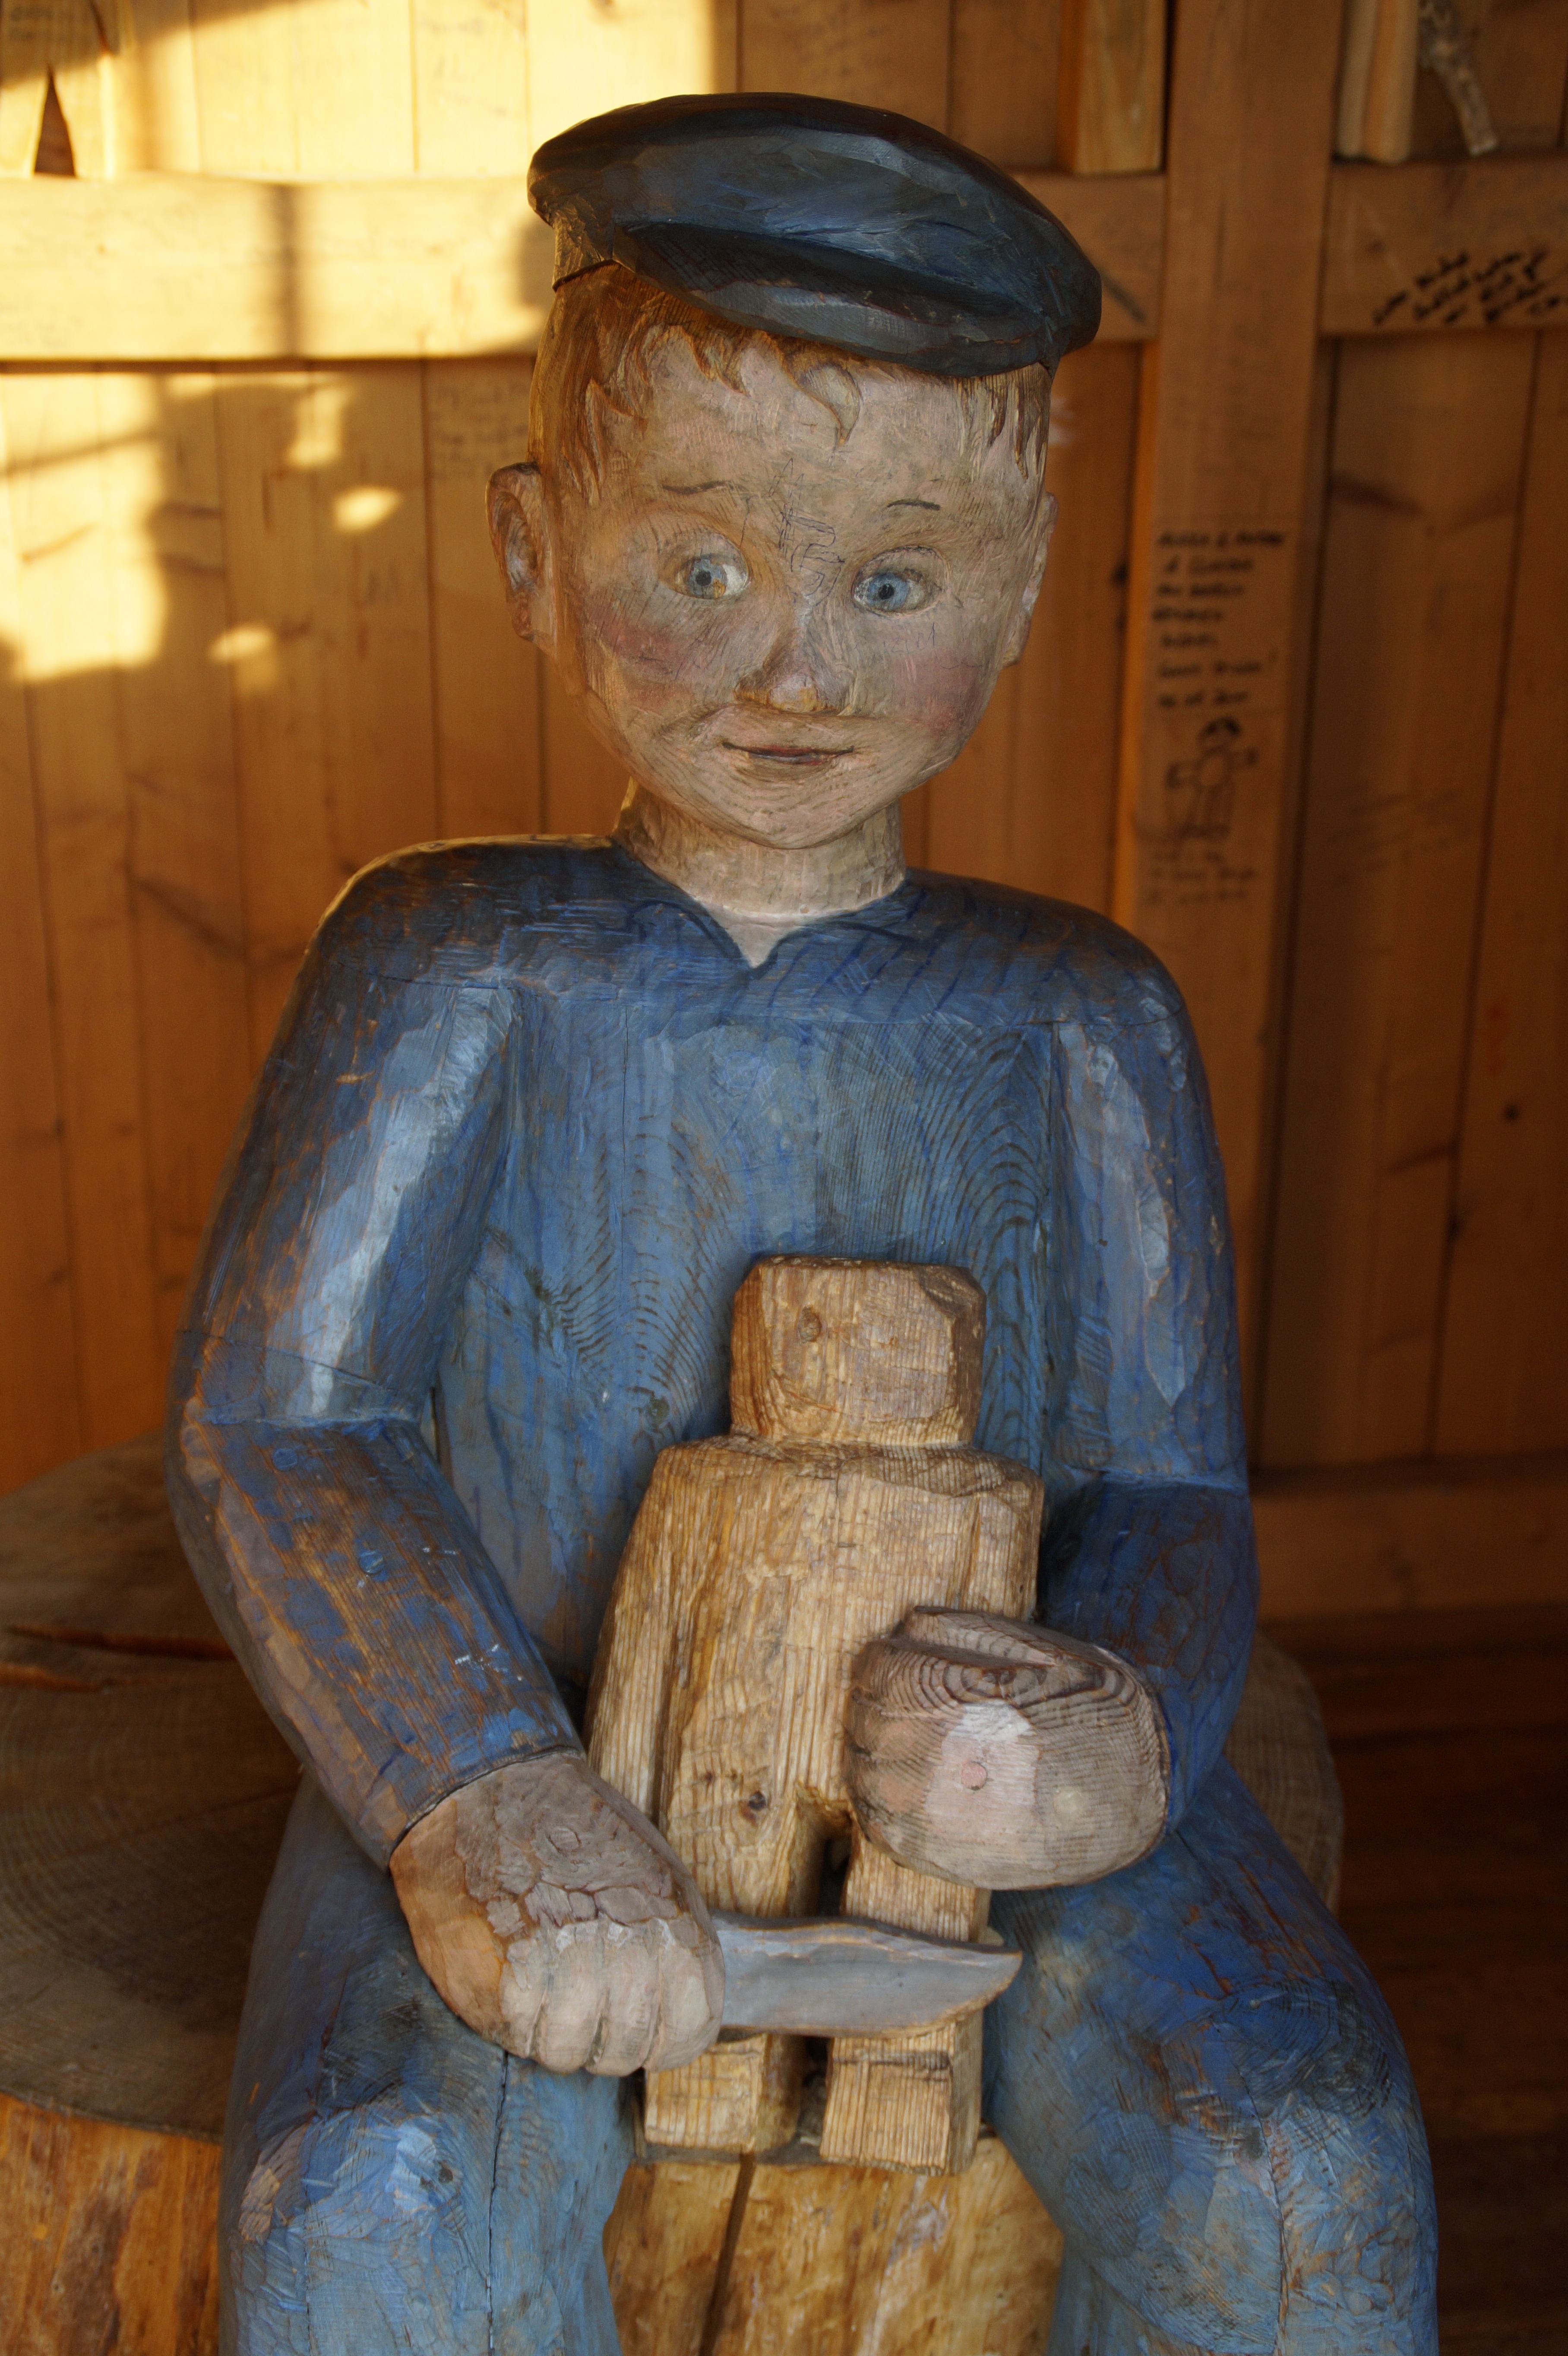 blue and brown wooden clothes on boy figurine